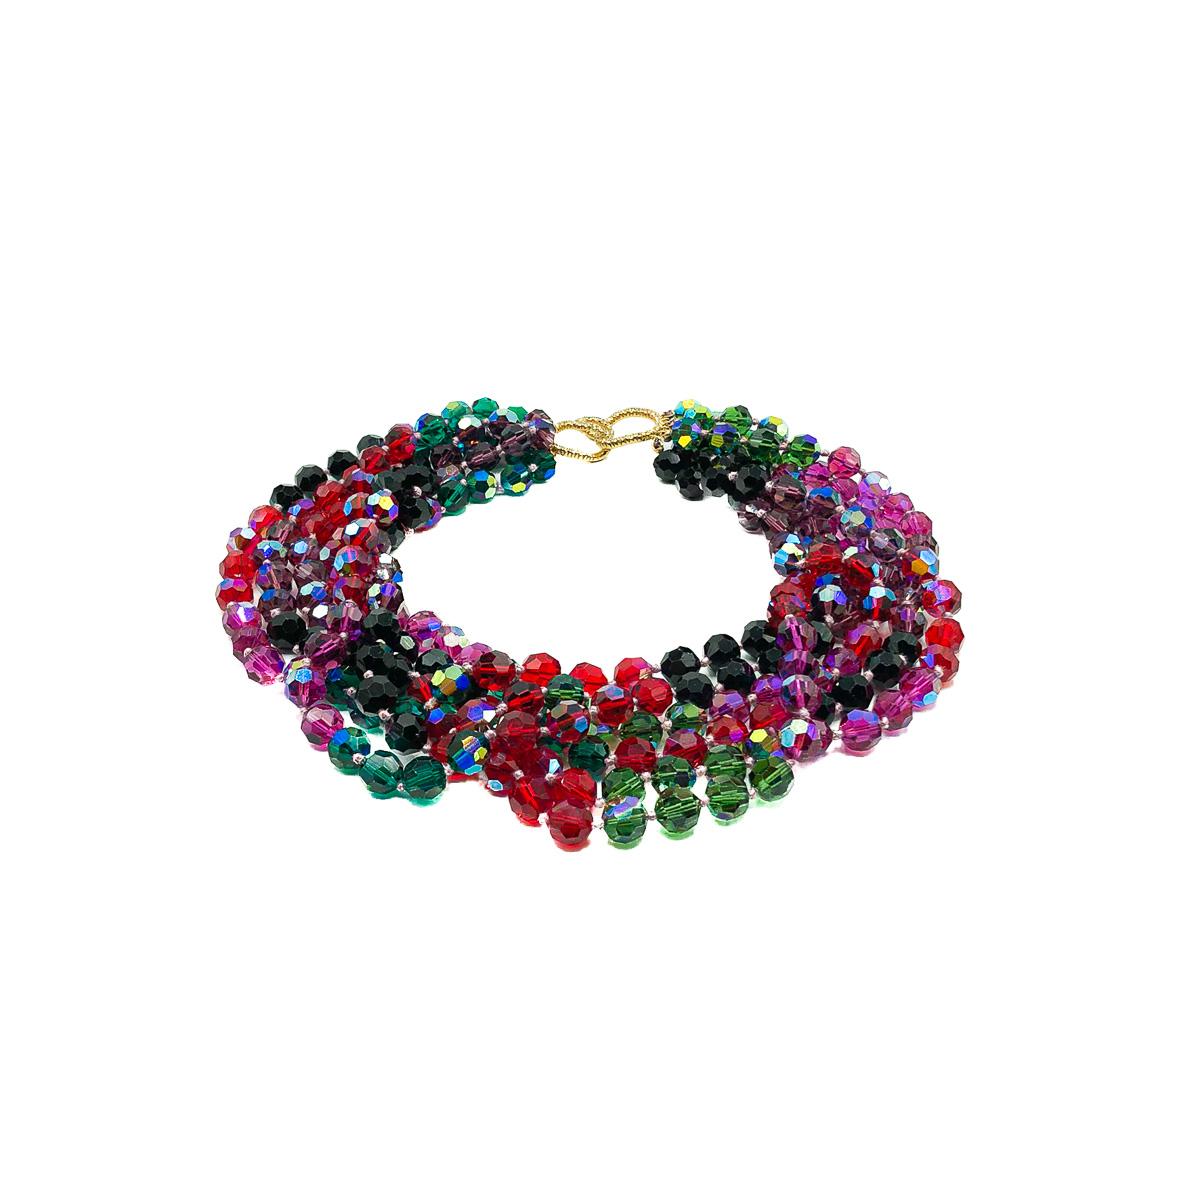 A striking Vintage Rainbow Torsade Collar of the most stunning quality. Crafted with six strands of individually knotted, Swarovski Aurora Borealis Crystal beads in purple, green and red. Finished with a gold plated loop style rhinestone set feature